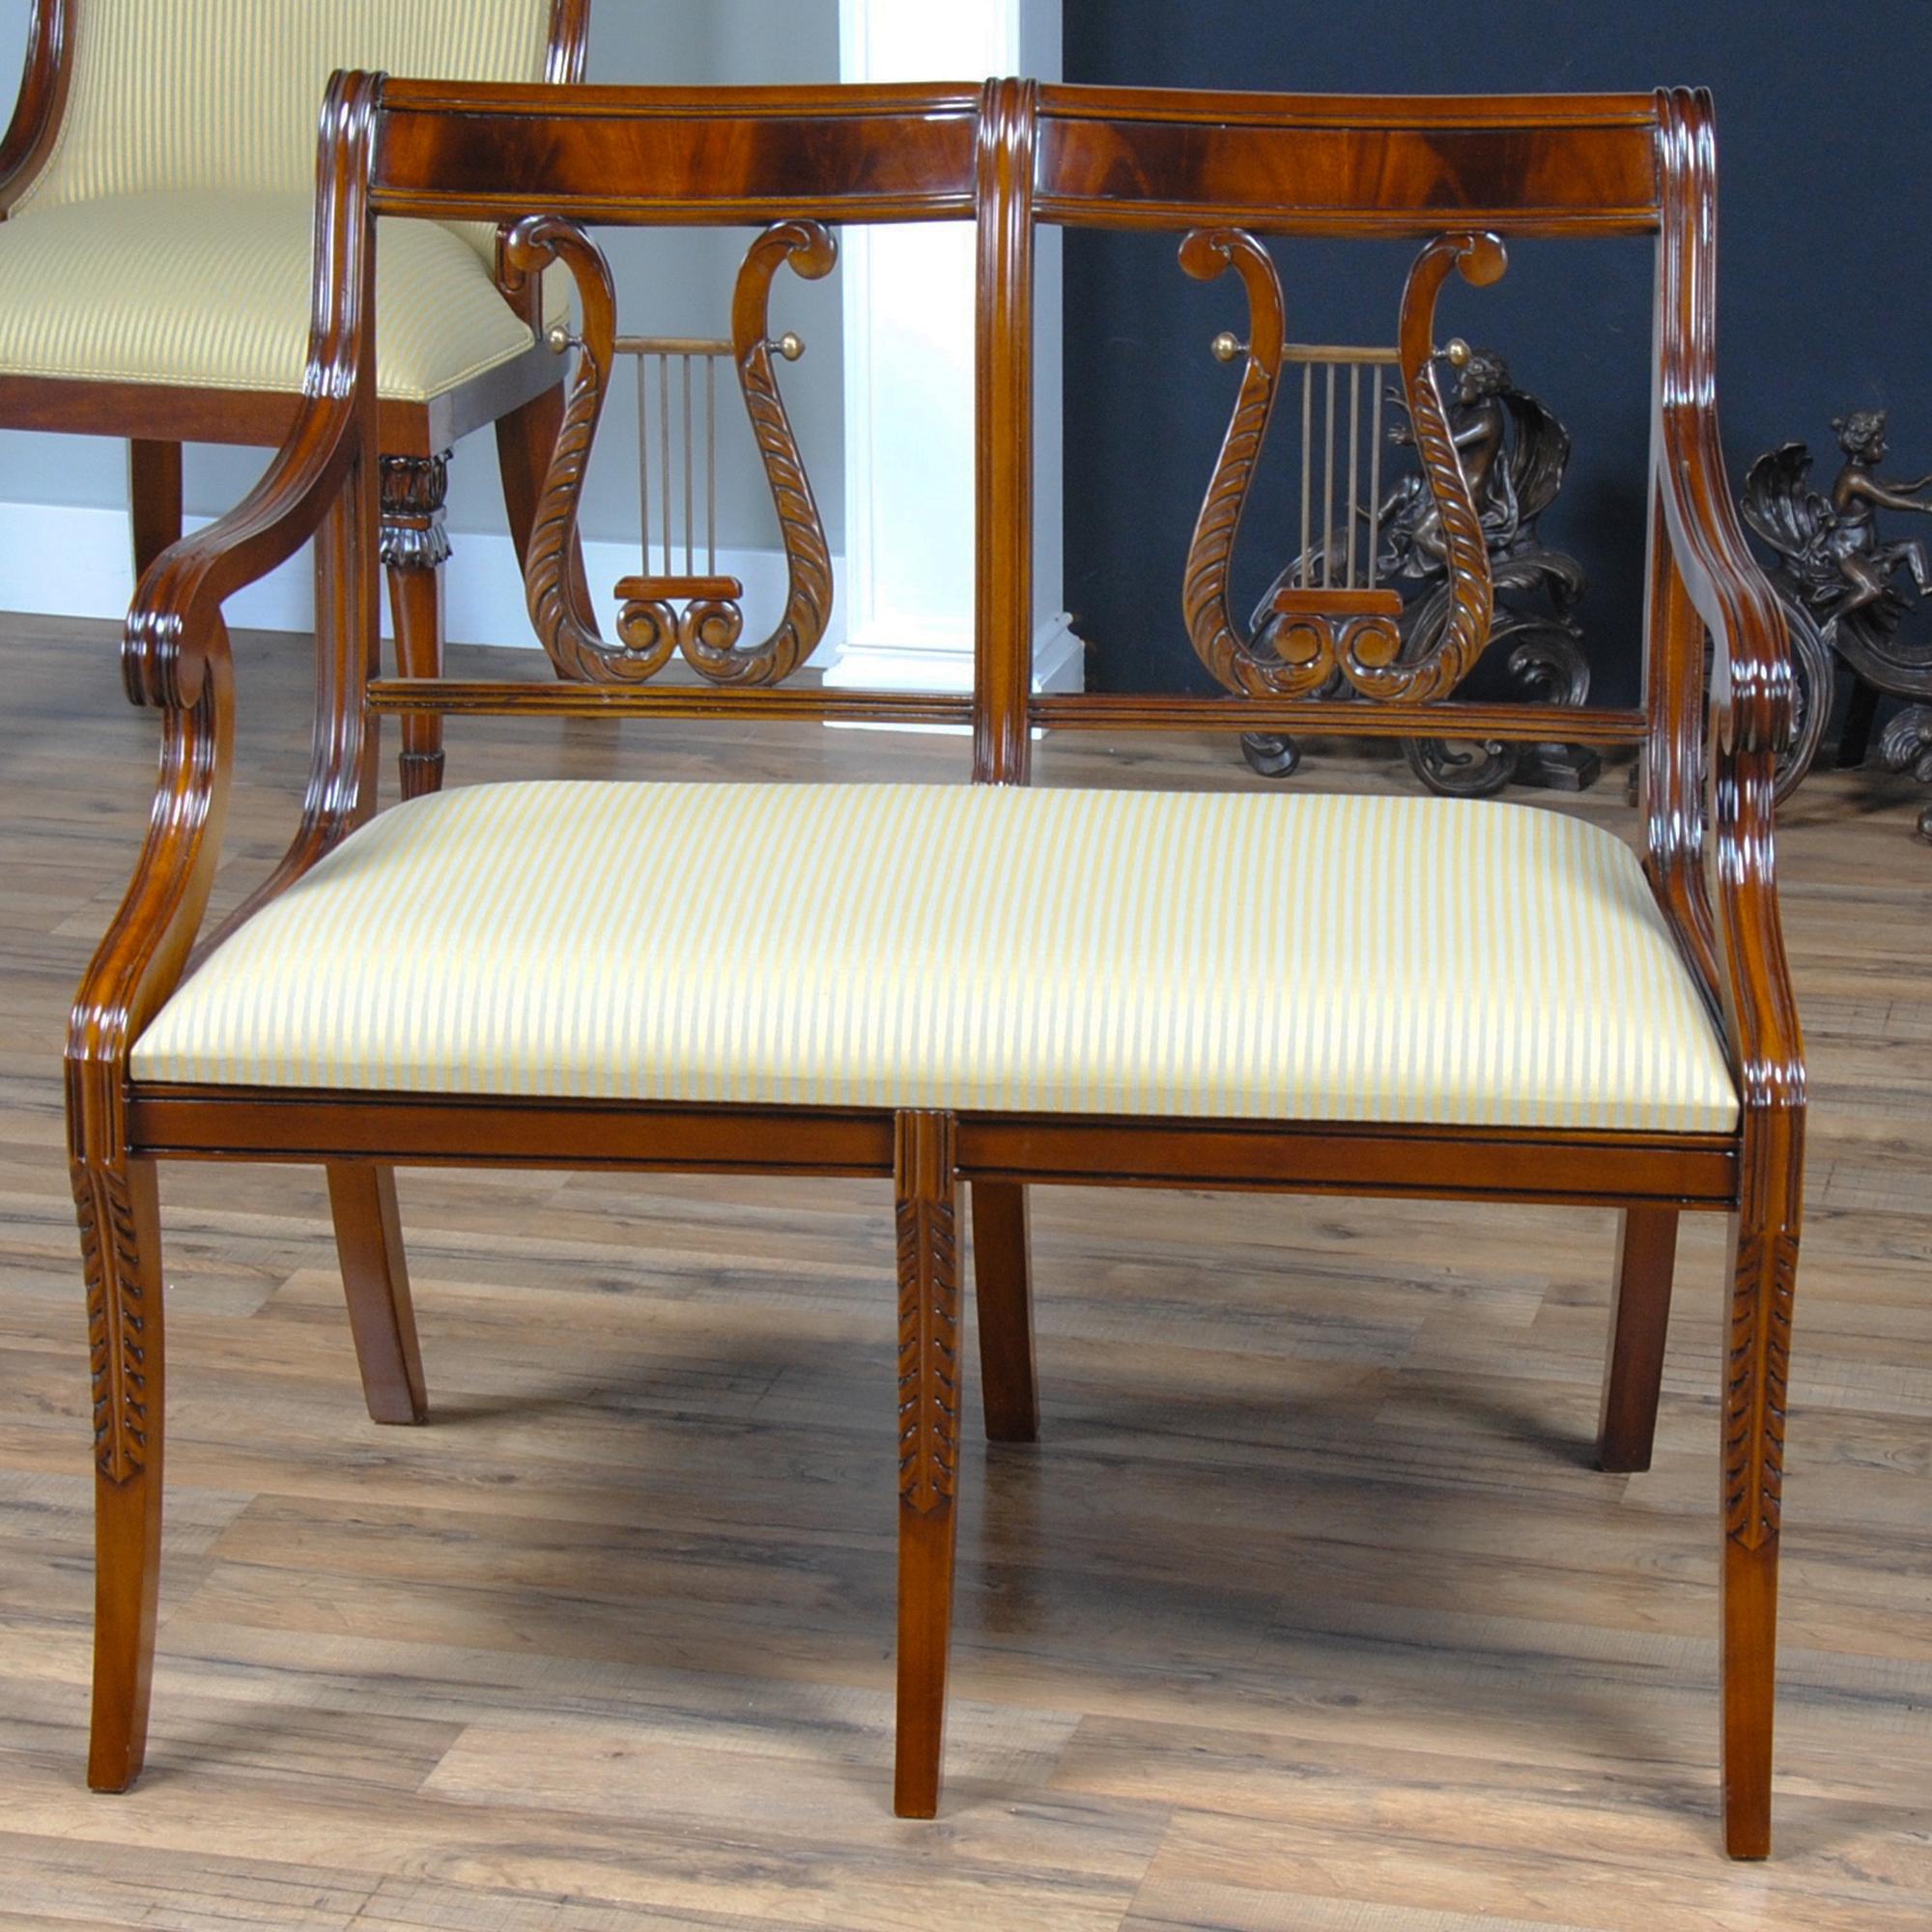 This high quality, hand carved Lyre Two Seat Chair features a figural mahogany crest rail, lyre carved back splat with brass decorations, and legs featuring acanthus carvings ending in tapered and shaped saber feet. Beautifully finished with our